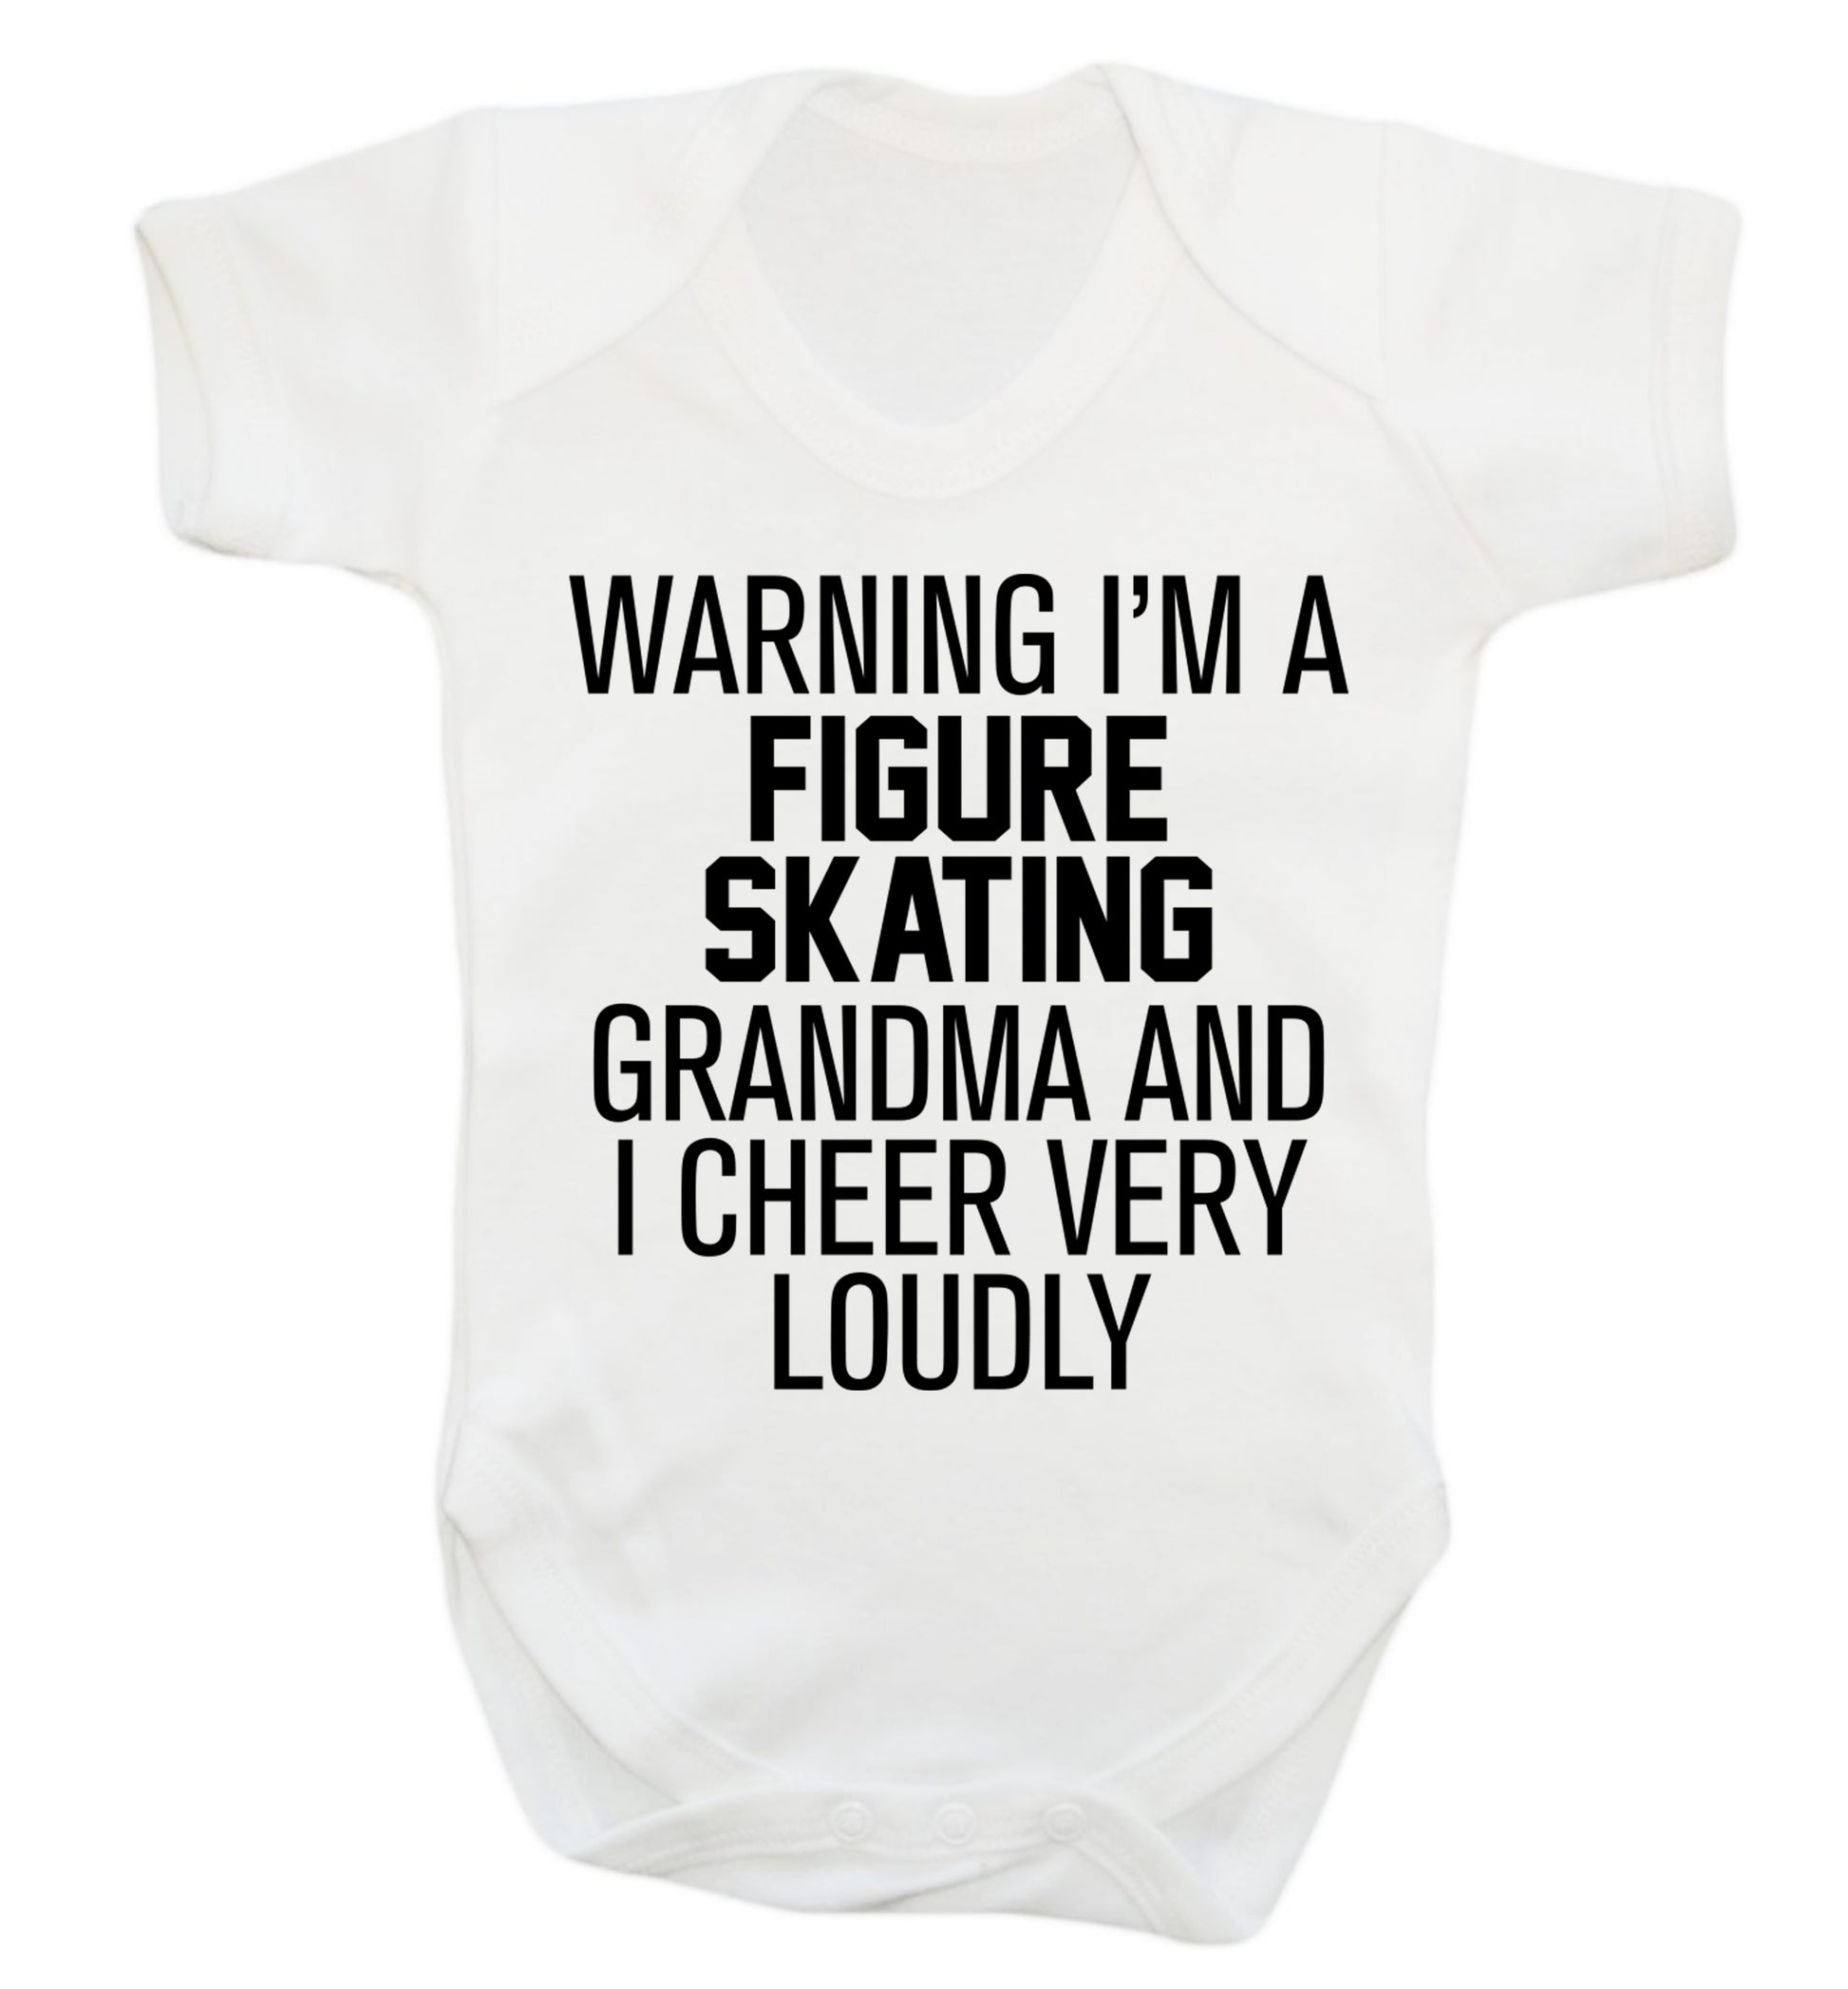 Warning I'm a figure skating grandma and I cheer very loudly Baby Vest white 18-24 months